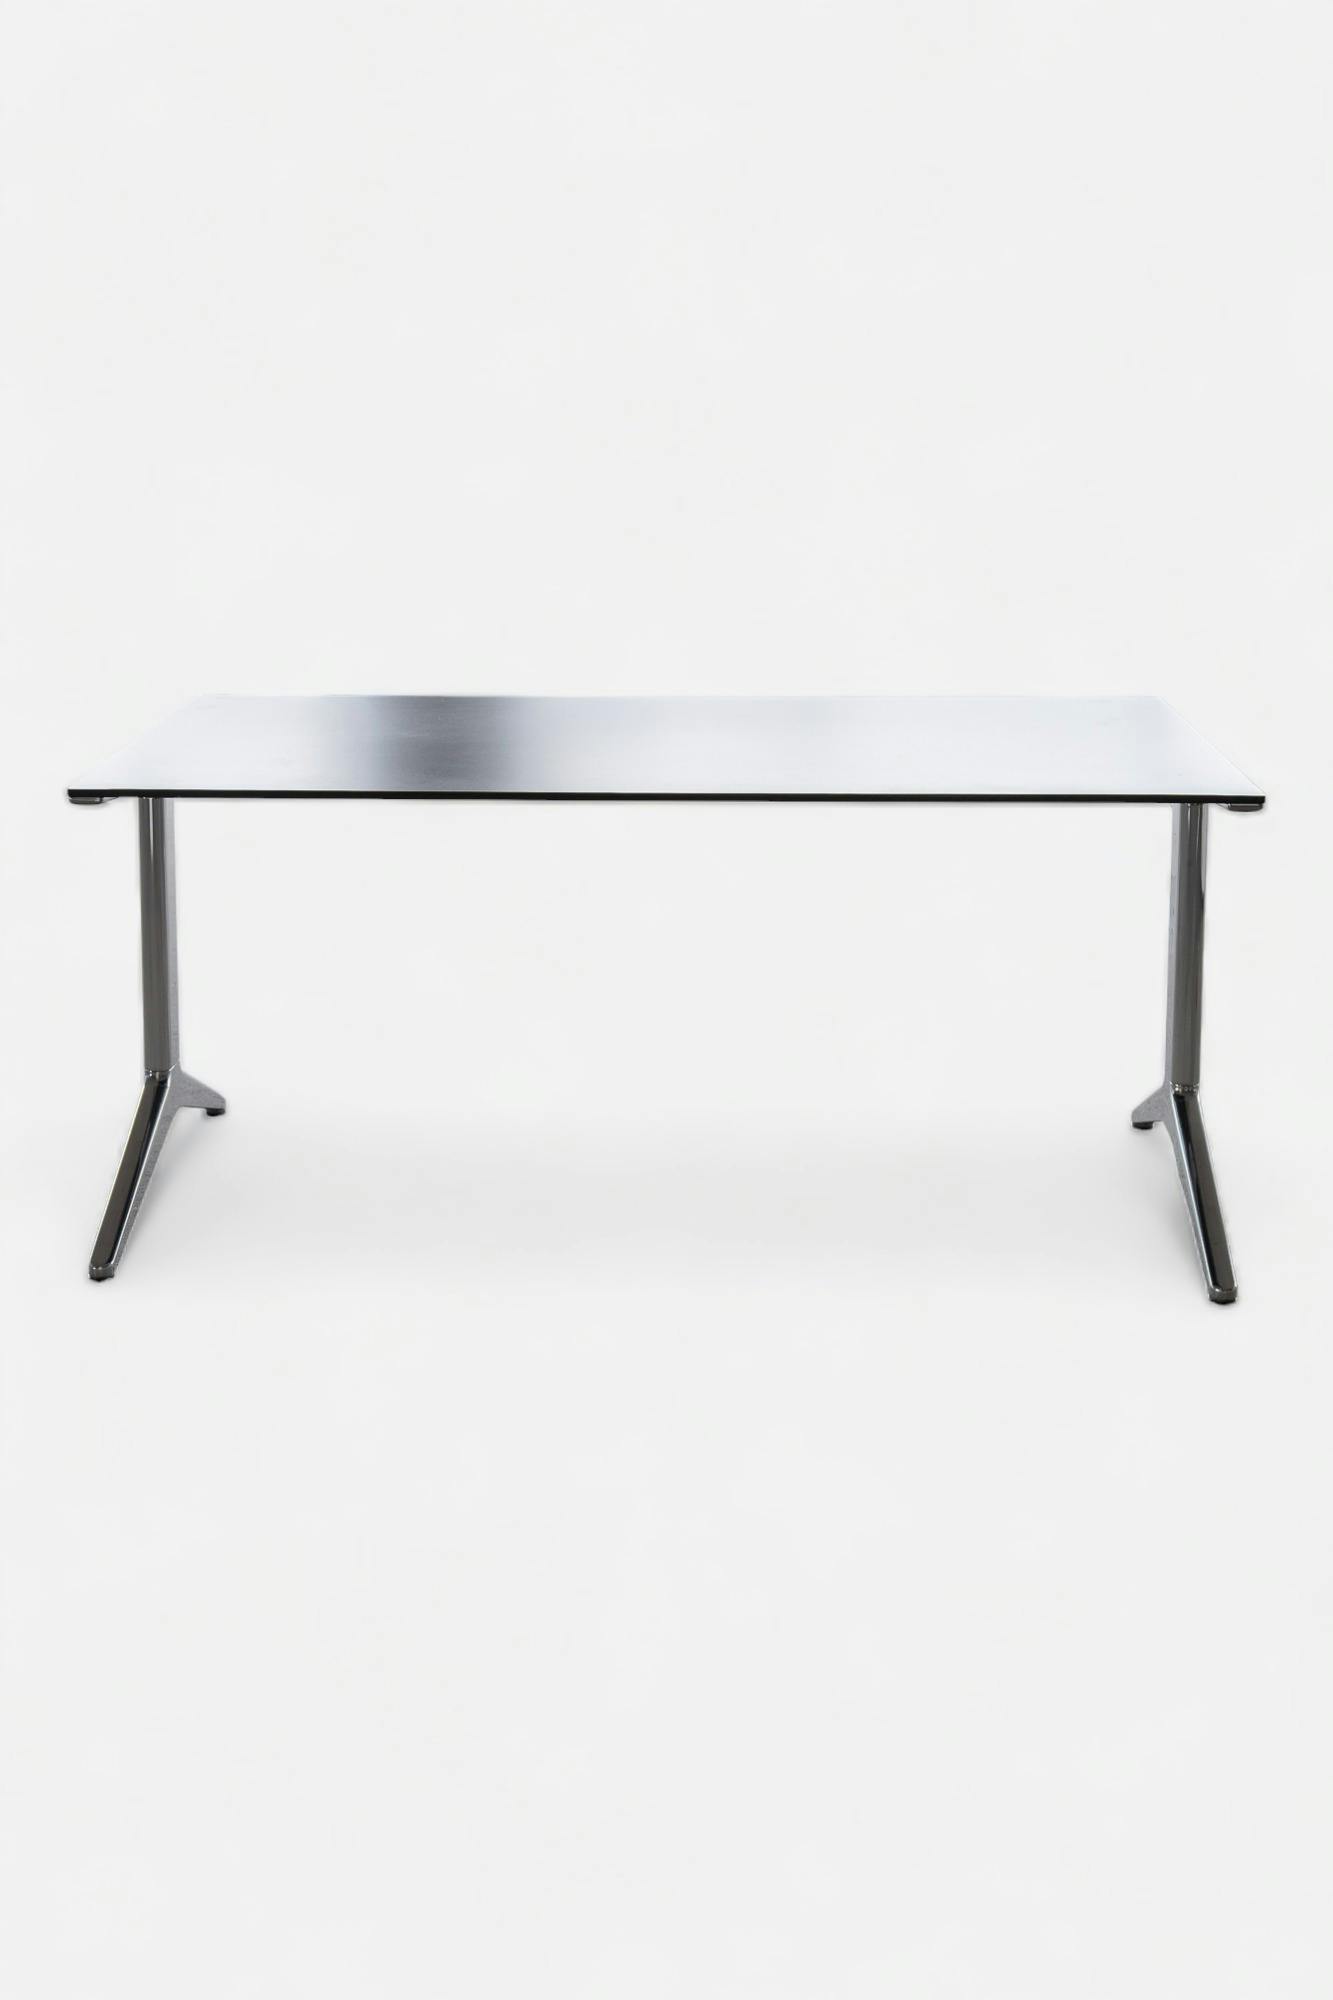 Ahrend black table top without castors - Relieve Furniture